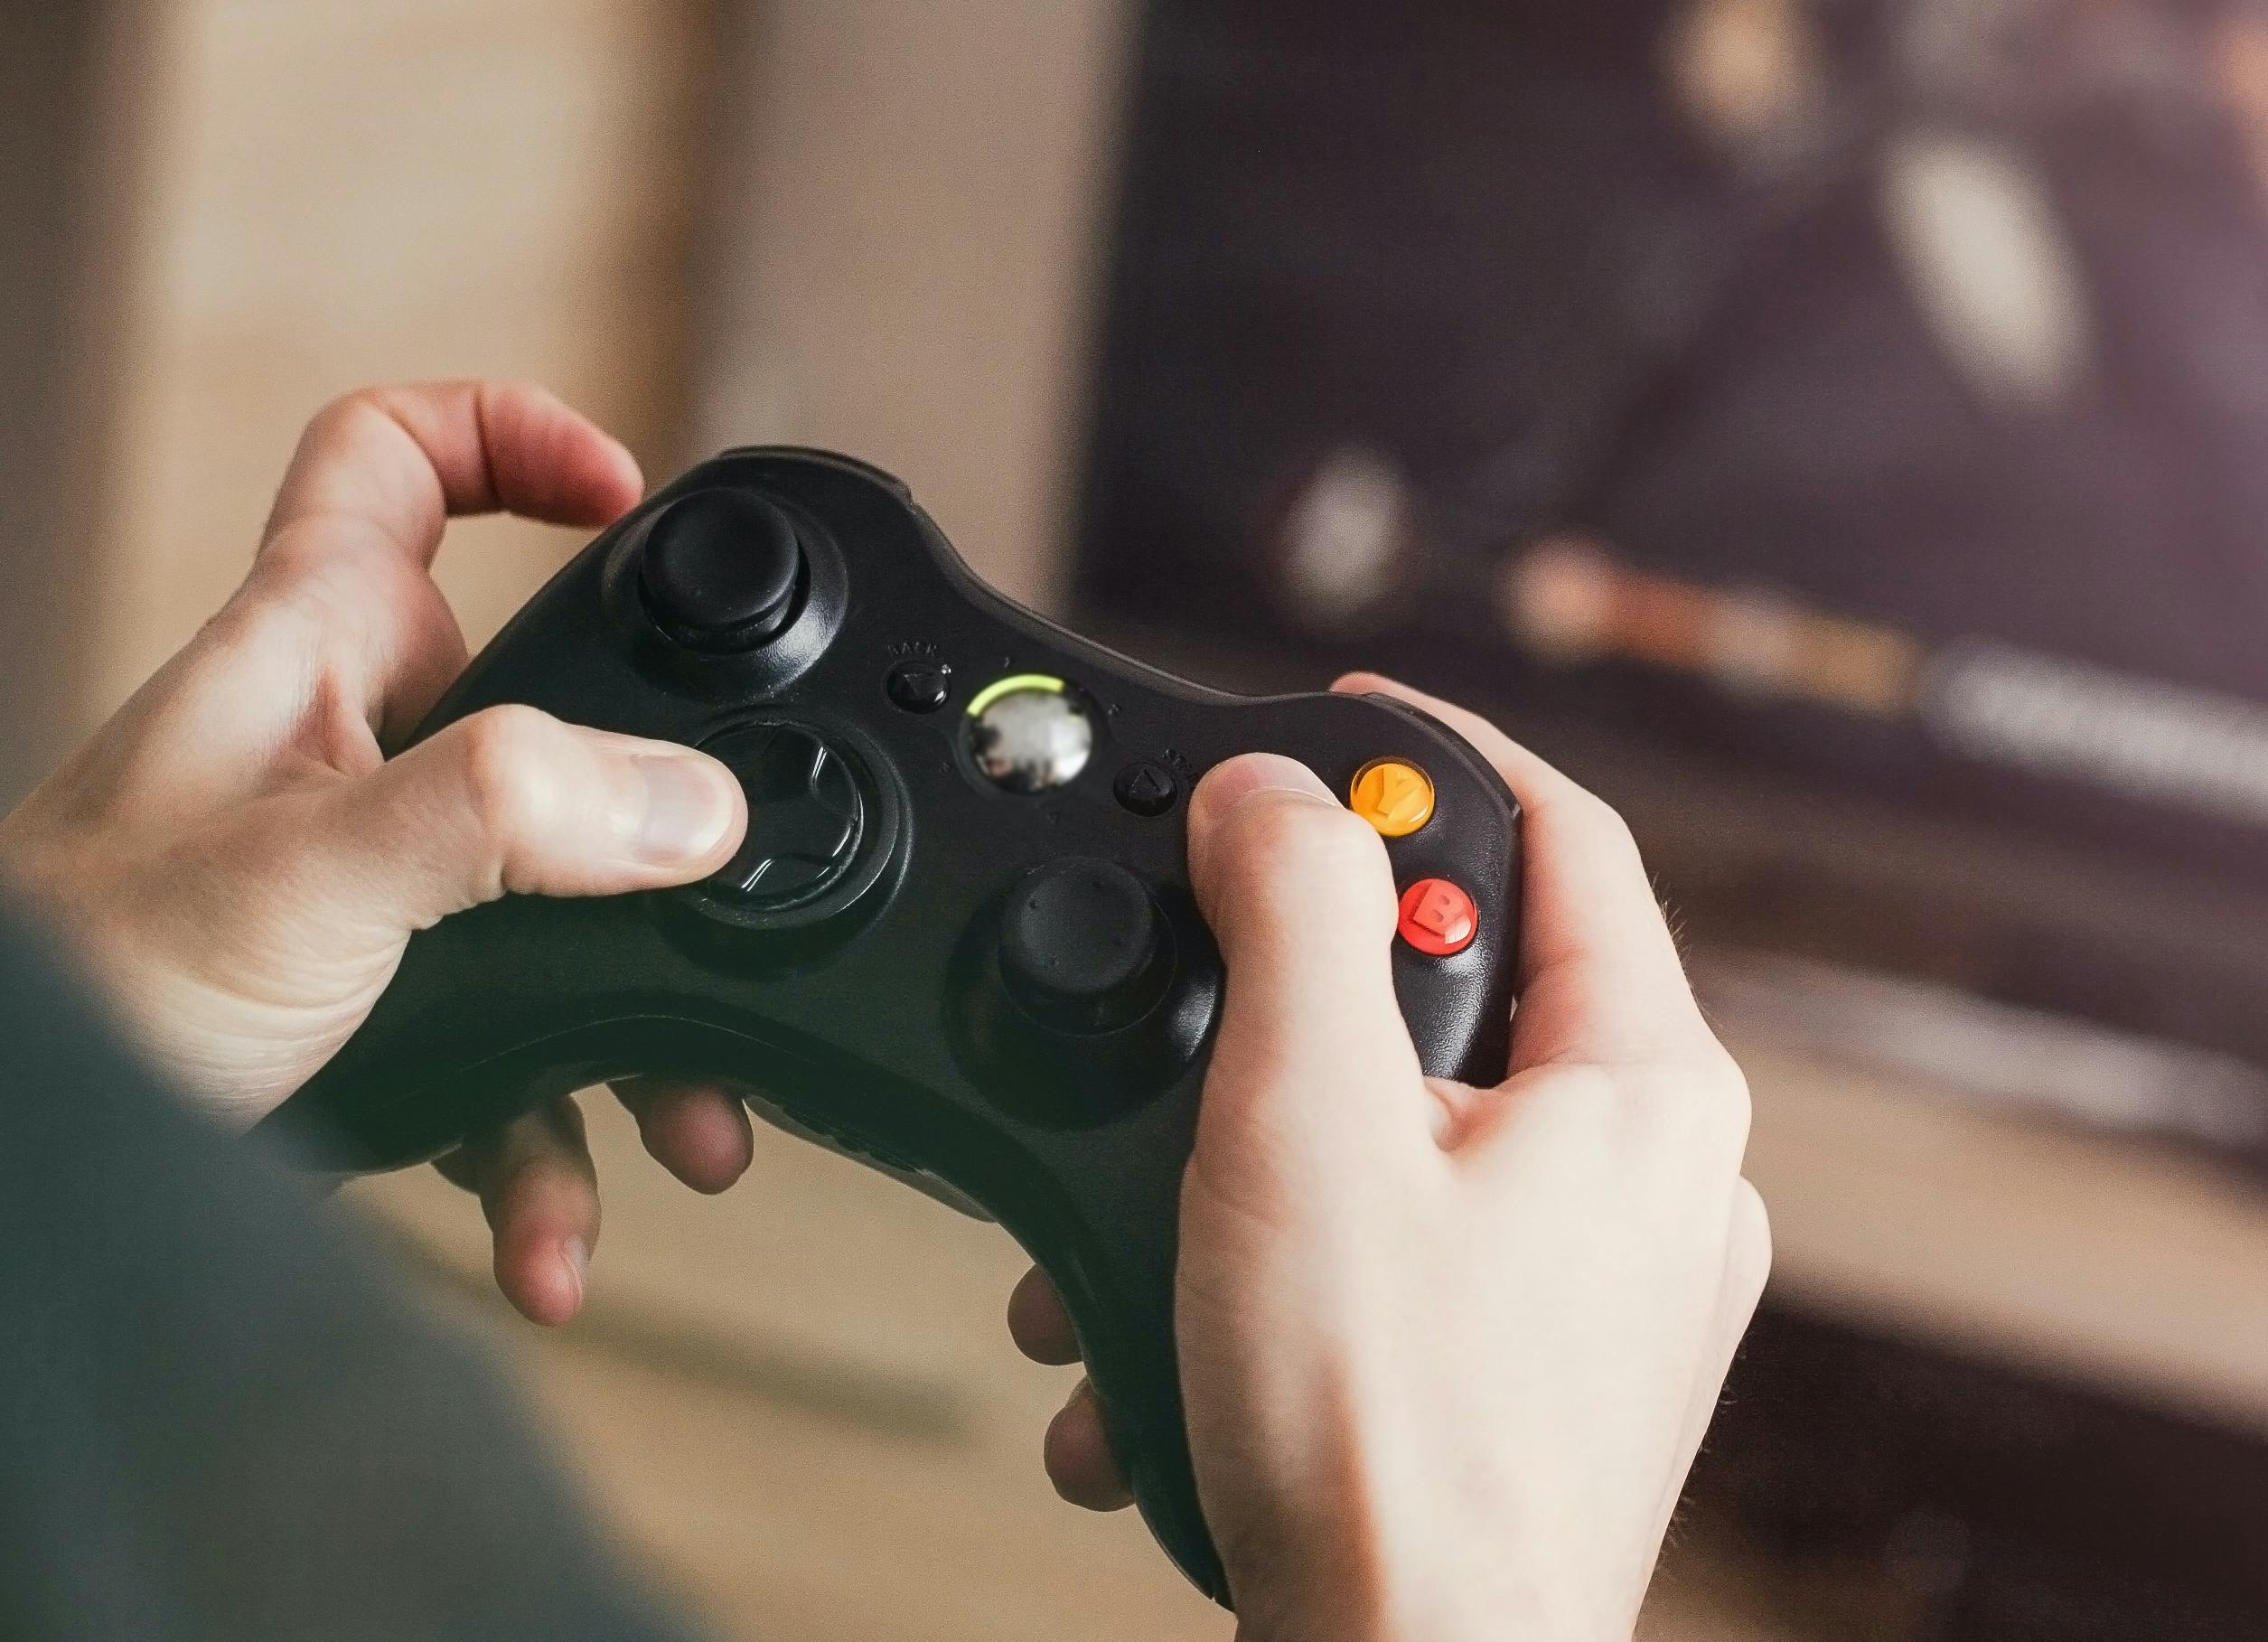 13 Cognitive Benefits Kids Get from Playing Video Games